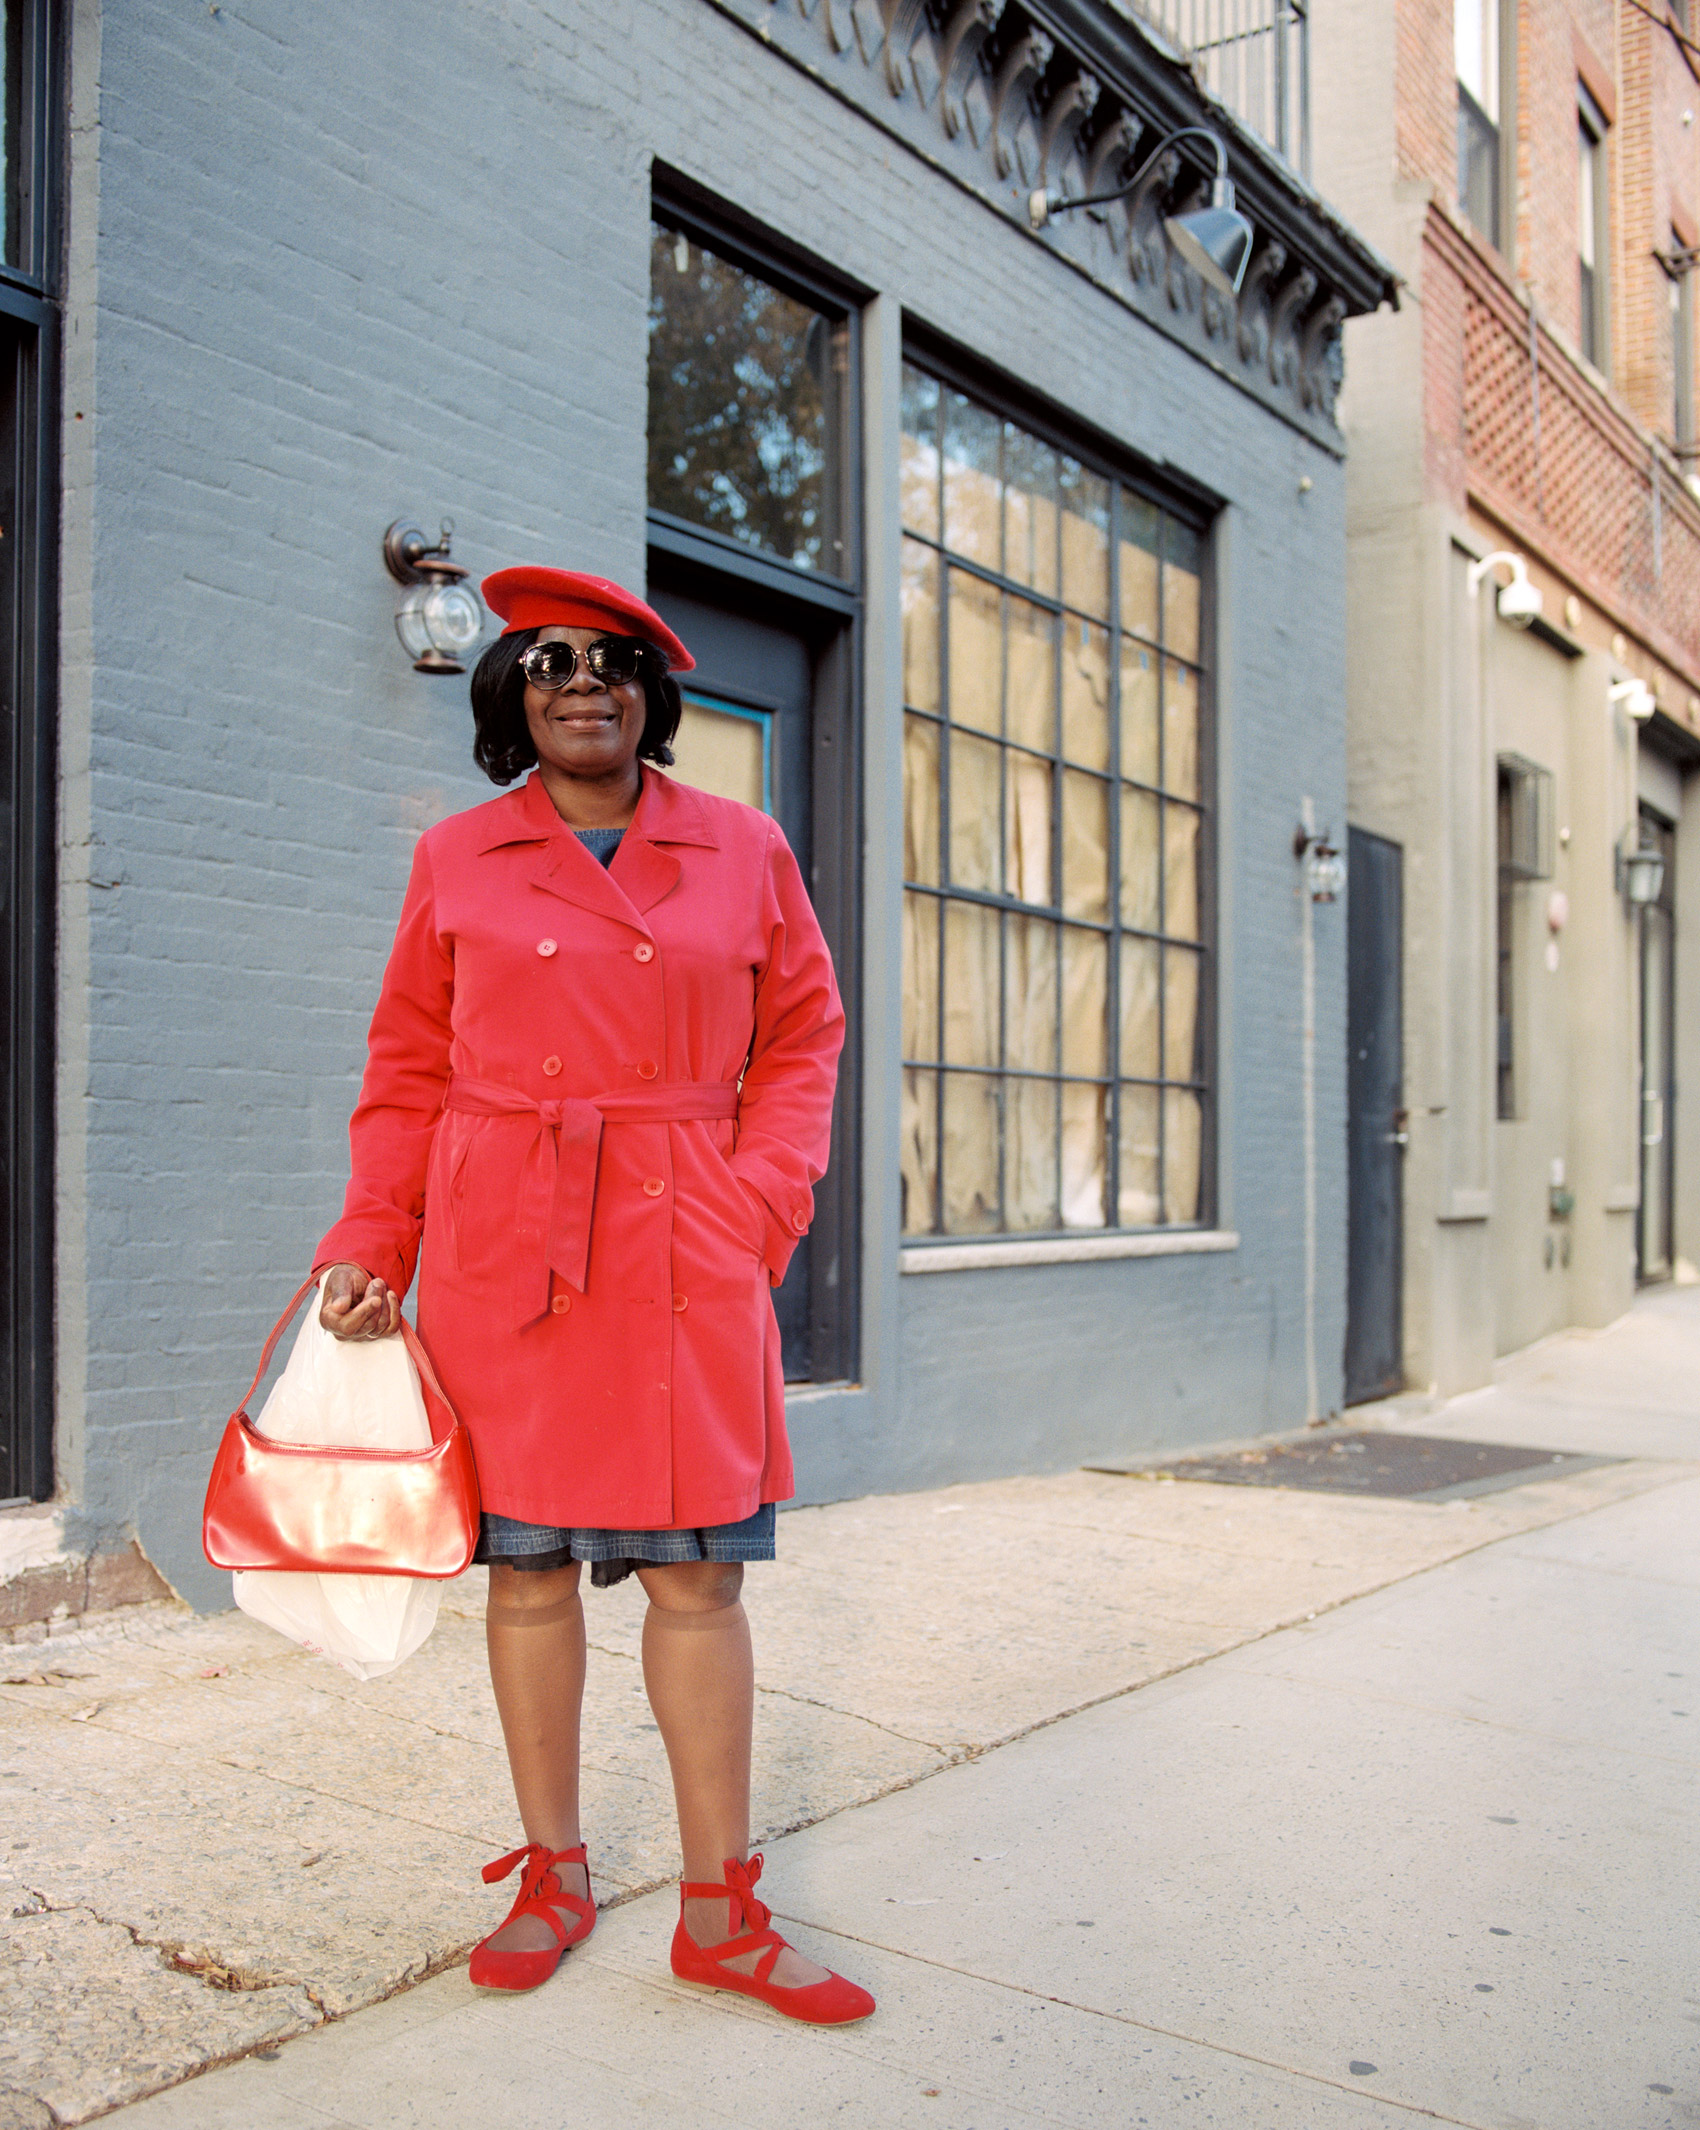 PORTRAIT-OF-A-WOMAN-IN-BEDSTUY-ALL-DRESSED-IN-RED